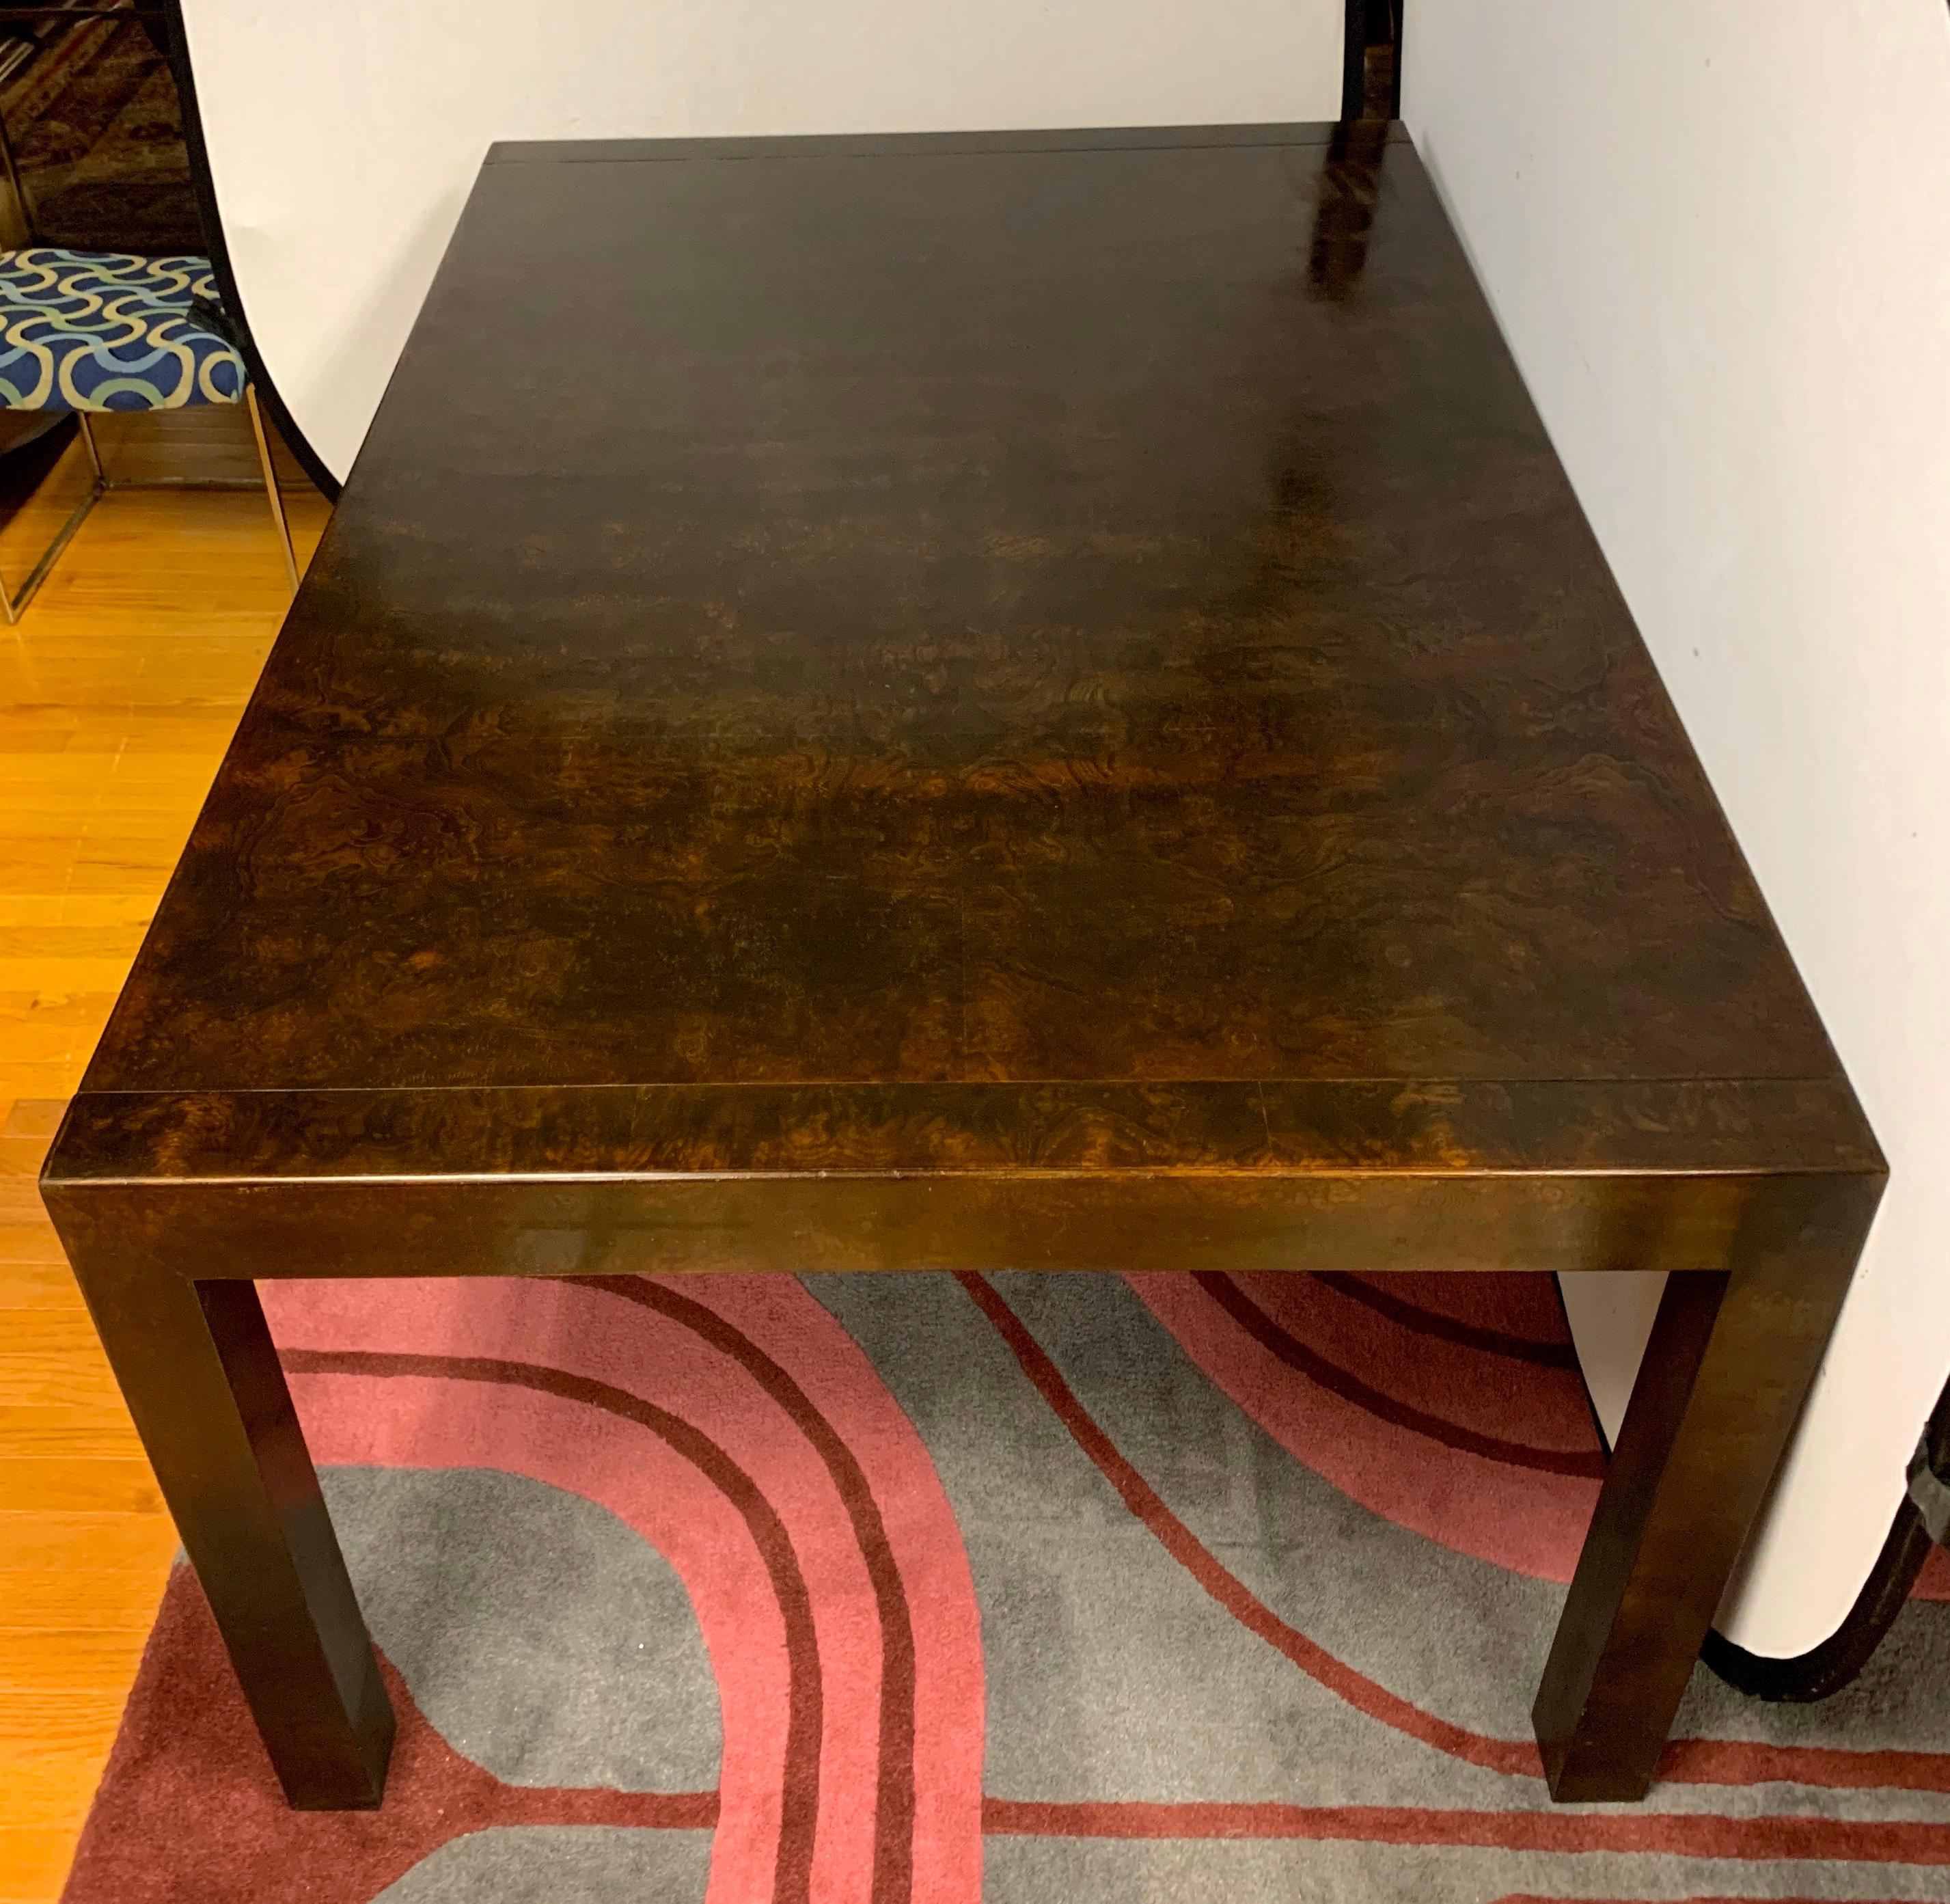 Elegant signed John Widdicomb expandable burl wood dining table. It comes with two, 20 inch leaves that take the table from 63.5 inches up to 103.5 inches when both leaves are in. The color is a dark brown and it has only age appropriate wear. In